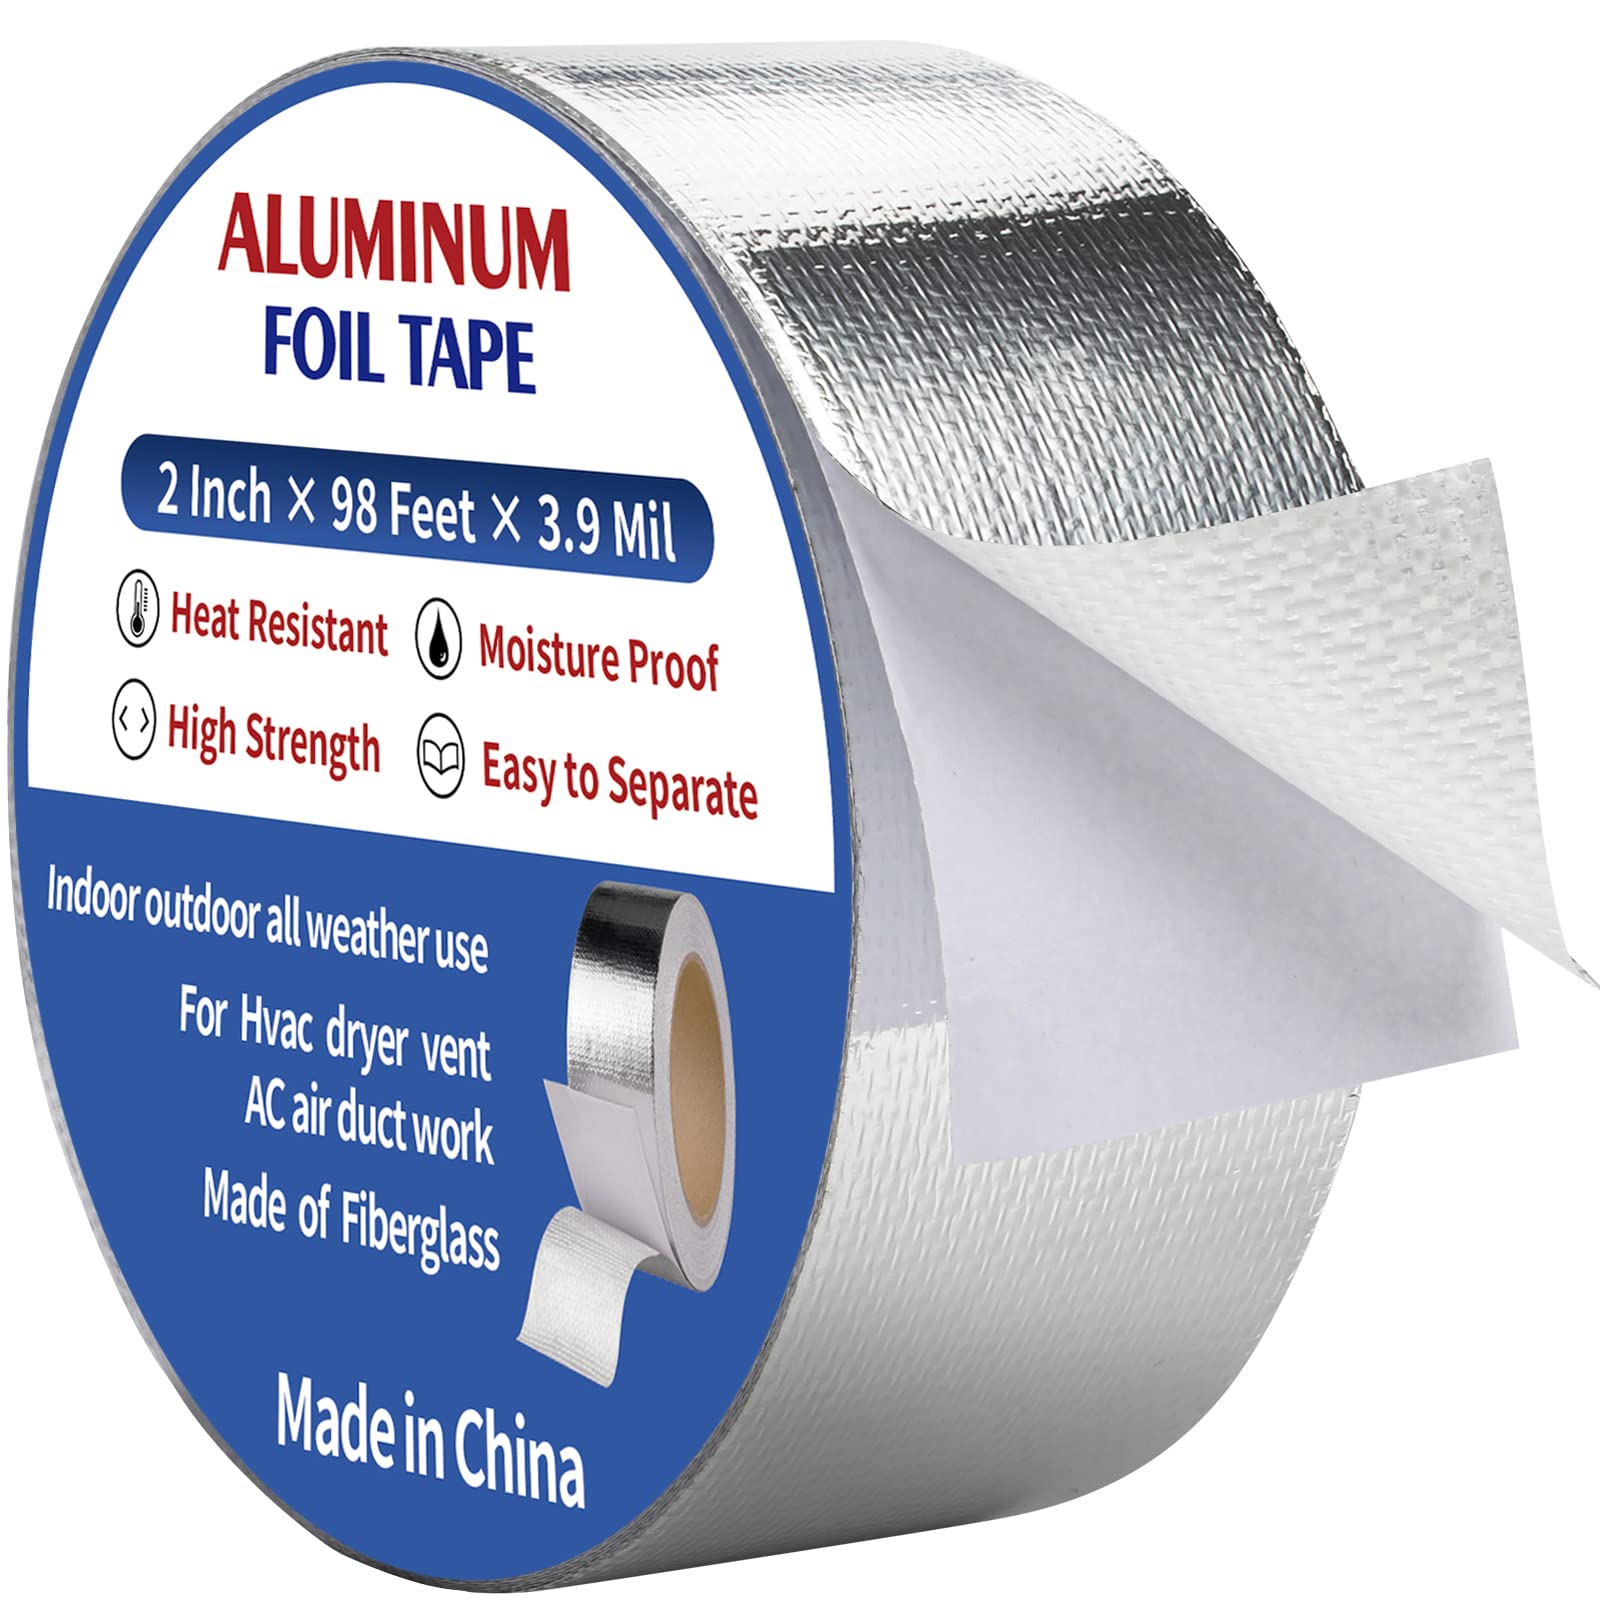 NEZUIBAN Aluminum Foil Tape,2Inch by98Feet(32.6yards) 3.9Mil Insulation Heat  Resistant Tape Perfect for HVAC, Dryer Vents,Sealing & Patching Hot & Cold  Air Ducts